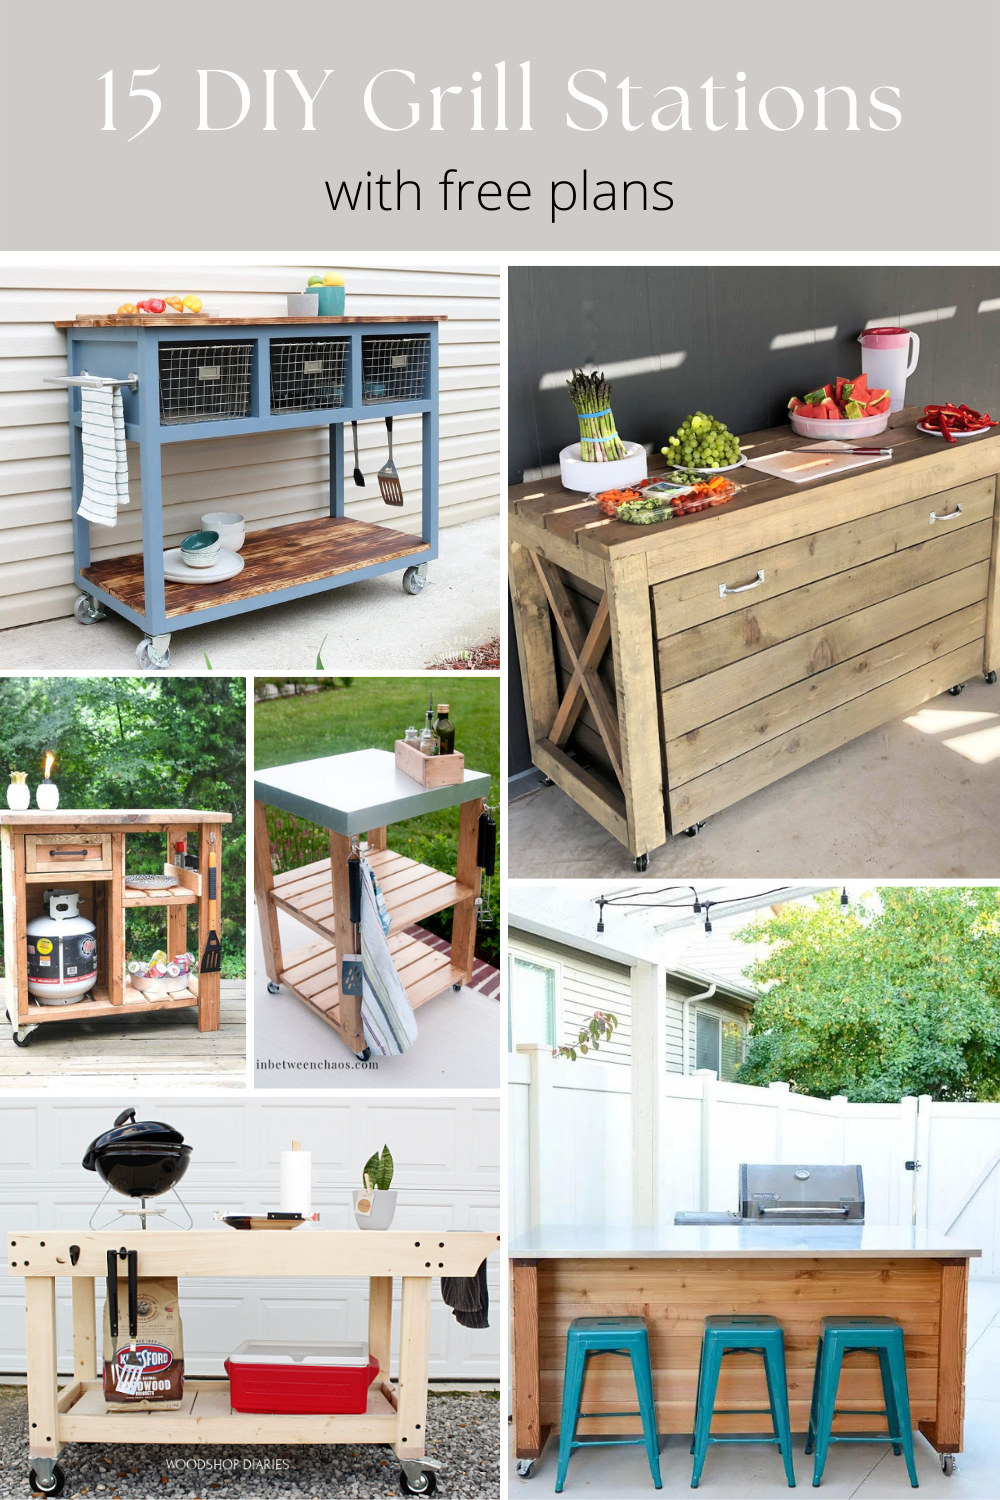 15 Diy Grill Stations With Free Plans